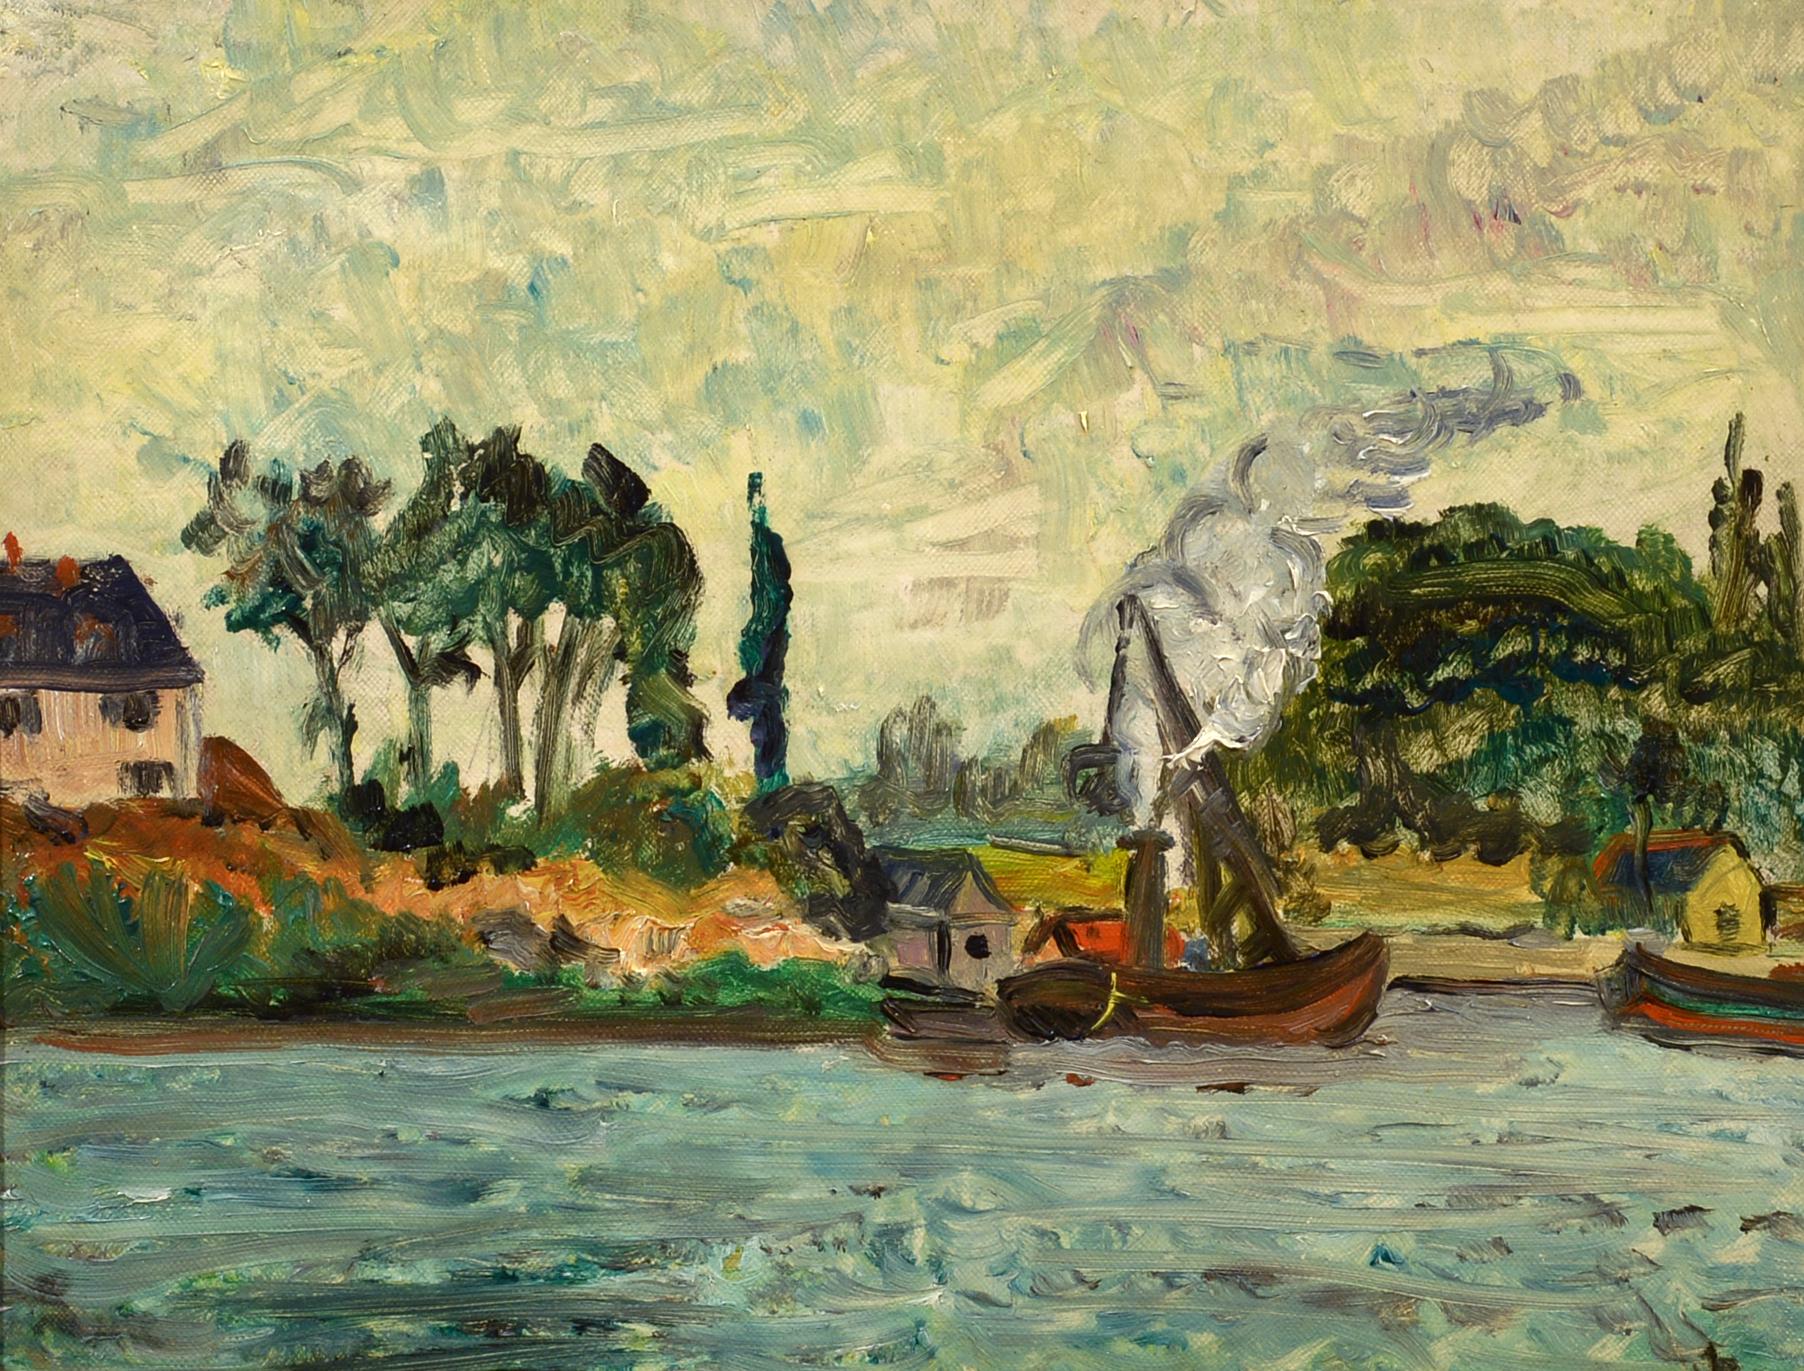 "Tugboats Working Along the River," French Post Impressionist, Pissarro, Signac